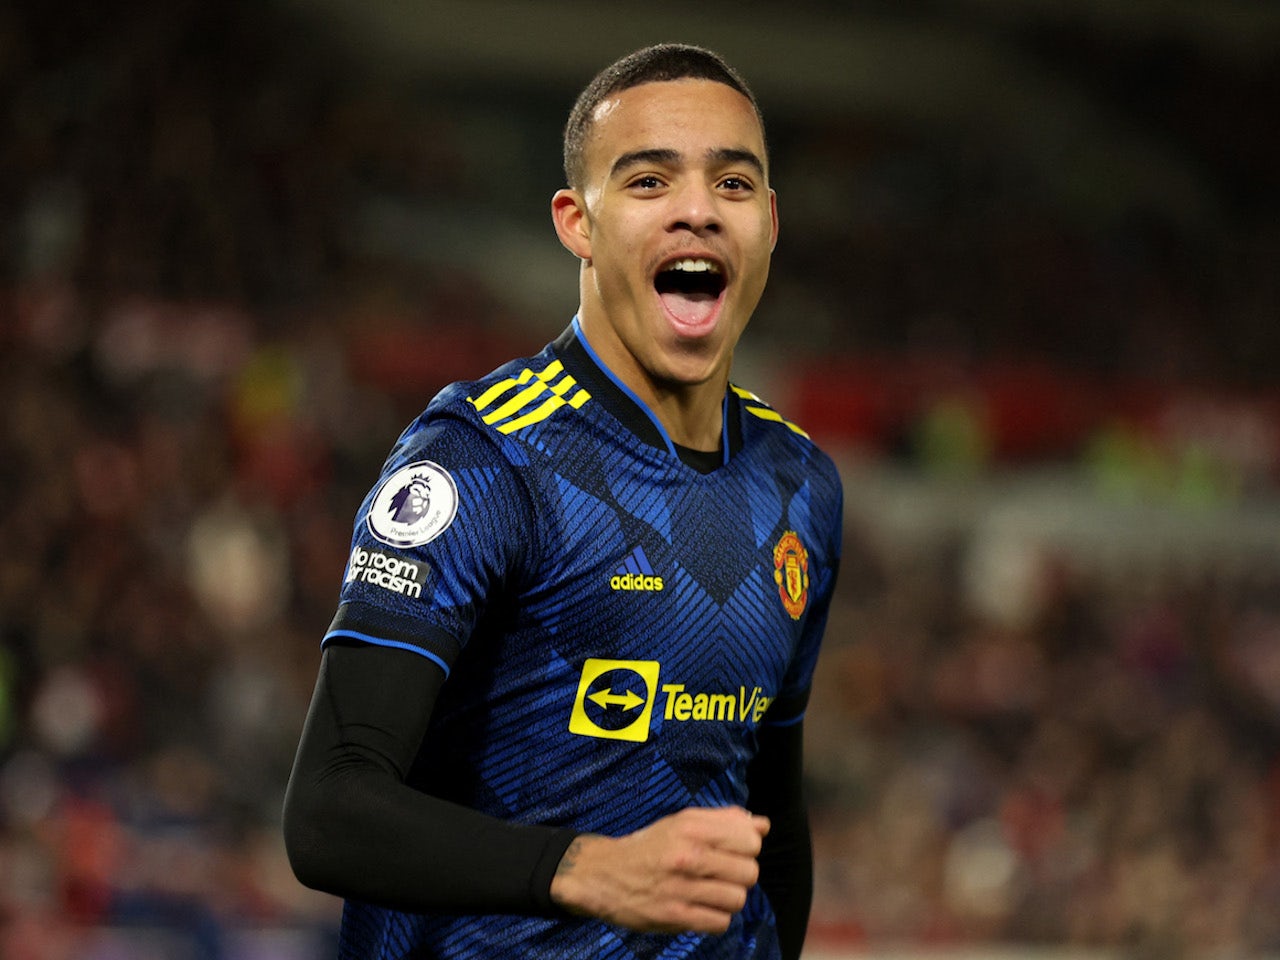 Manchester United 'want £43m for Mason Greenwood this summer'